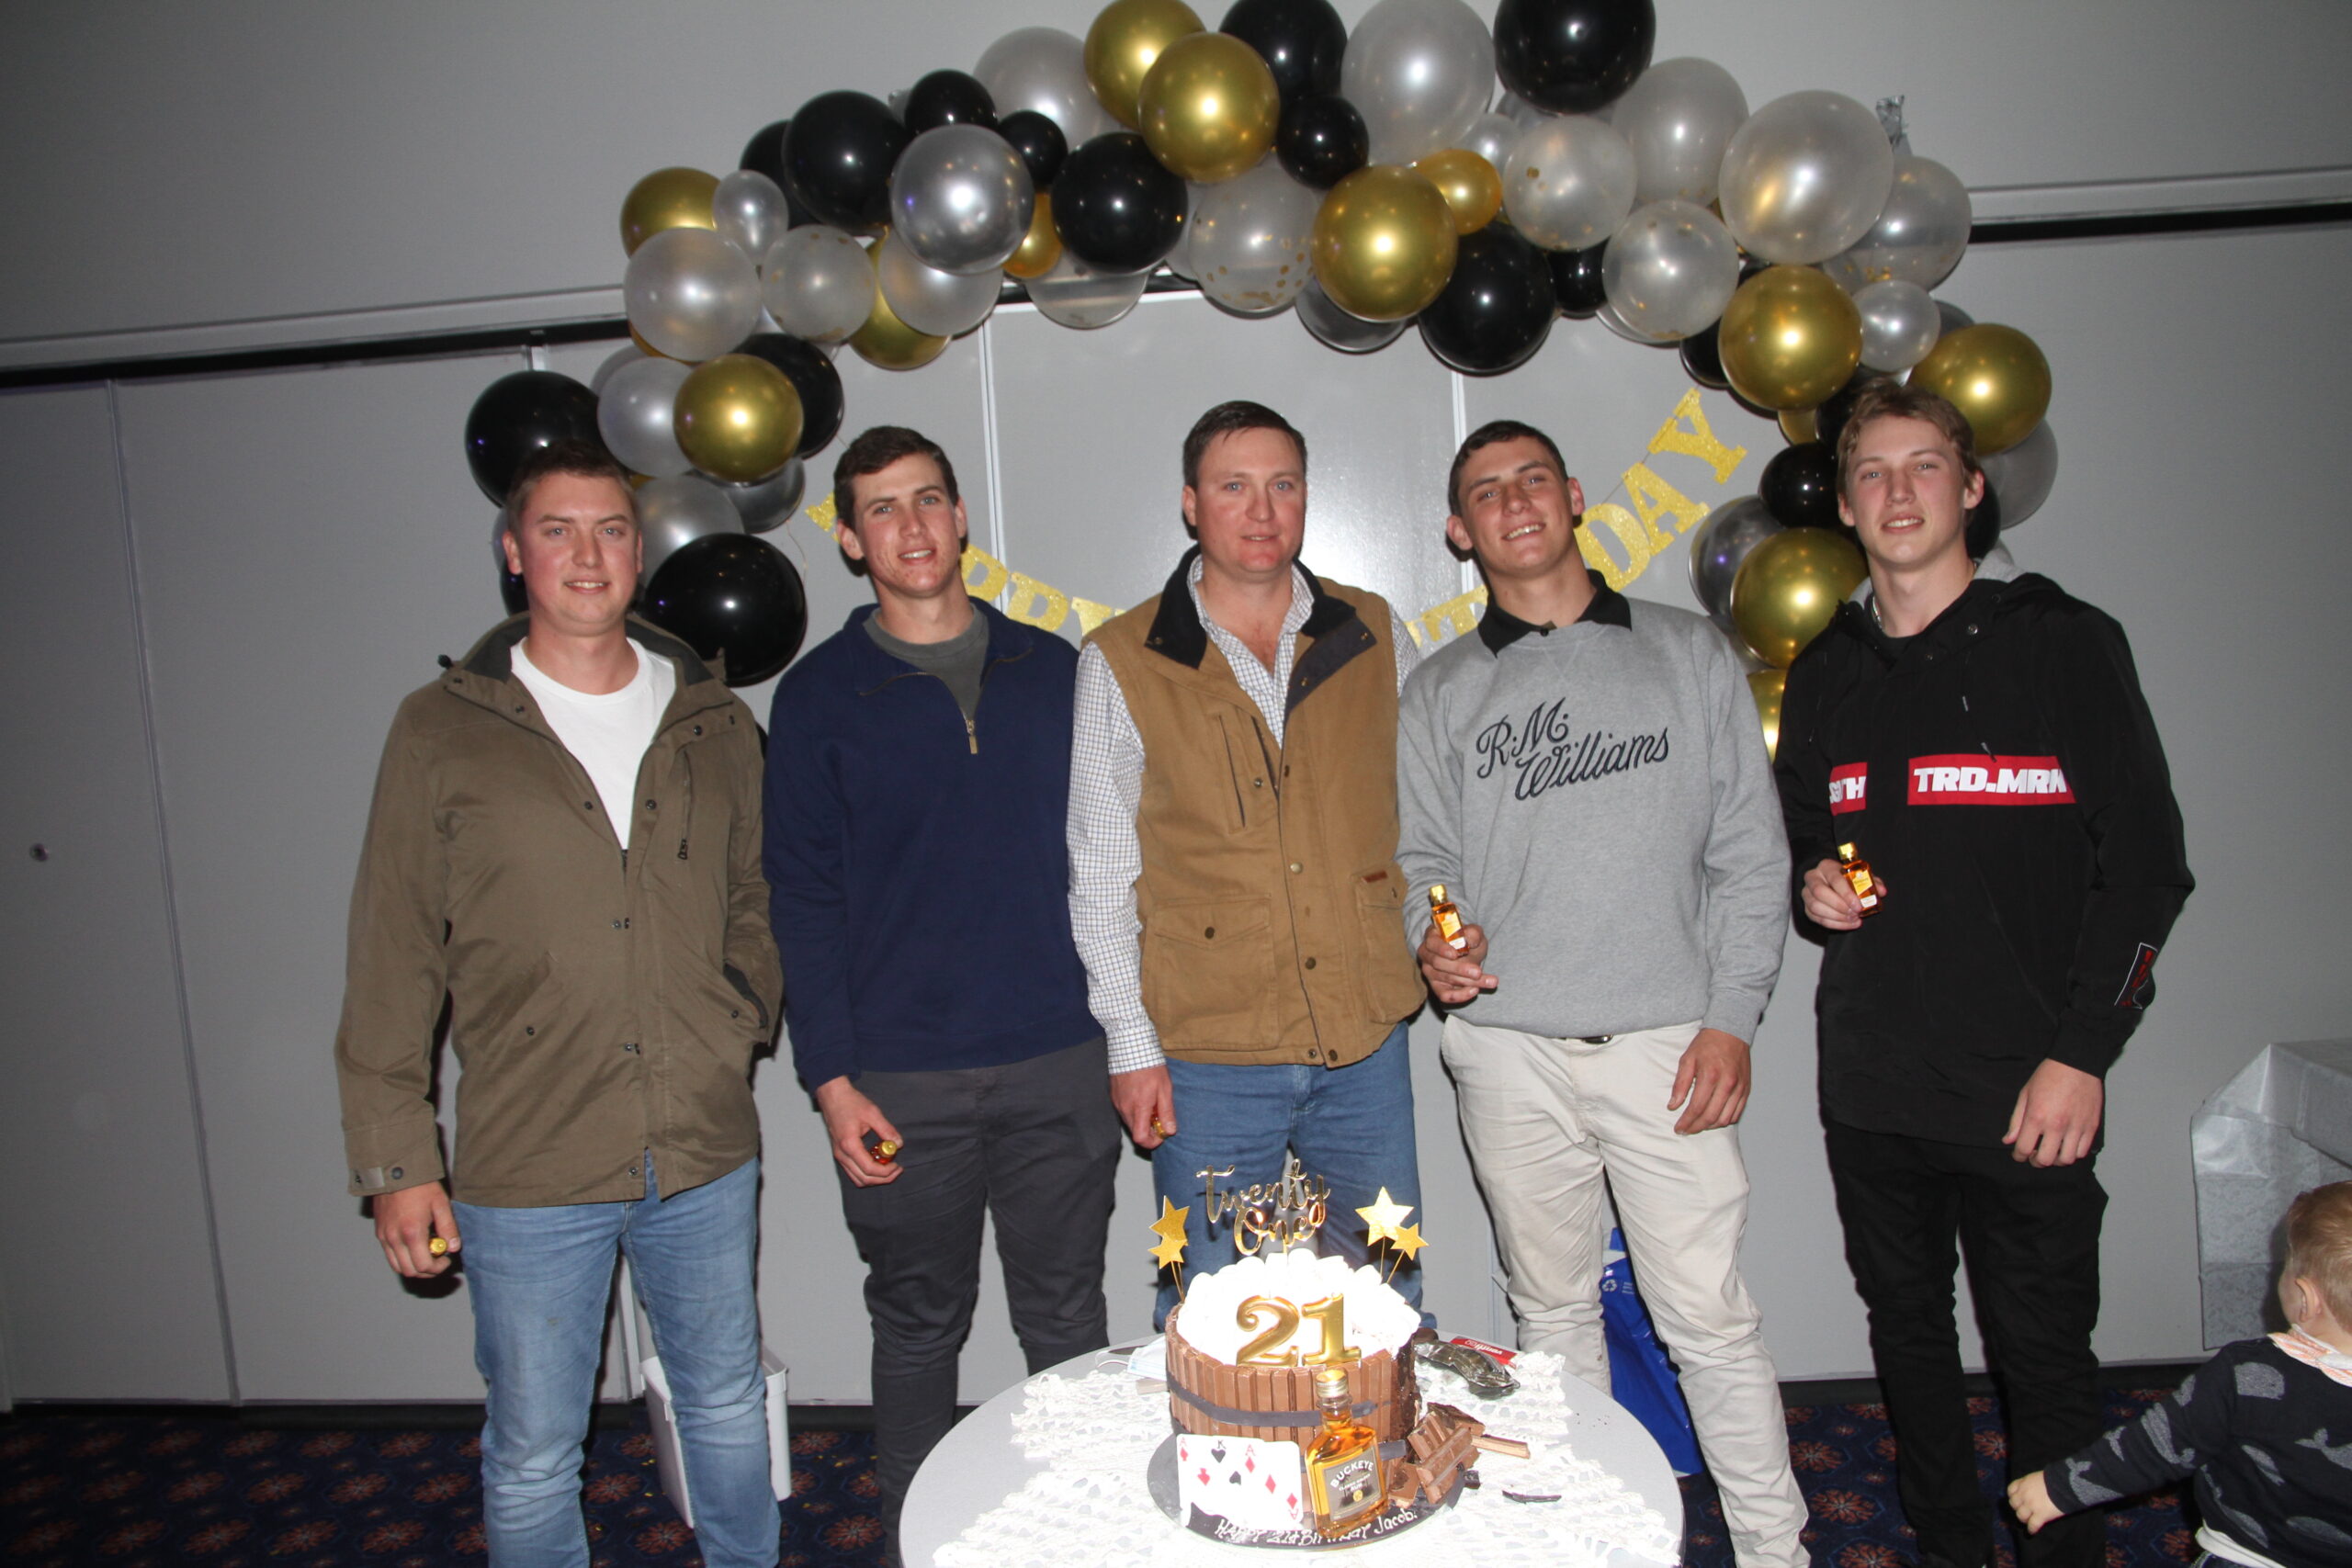 Jacob with his brothers, Jono and Jordan Druce, Dion Morris, Jacob and Jesse Druce.